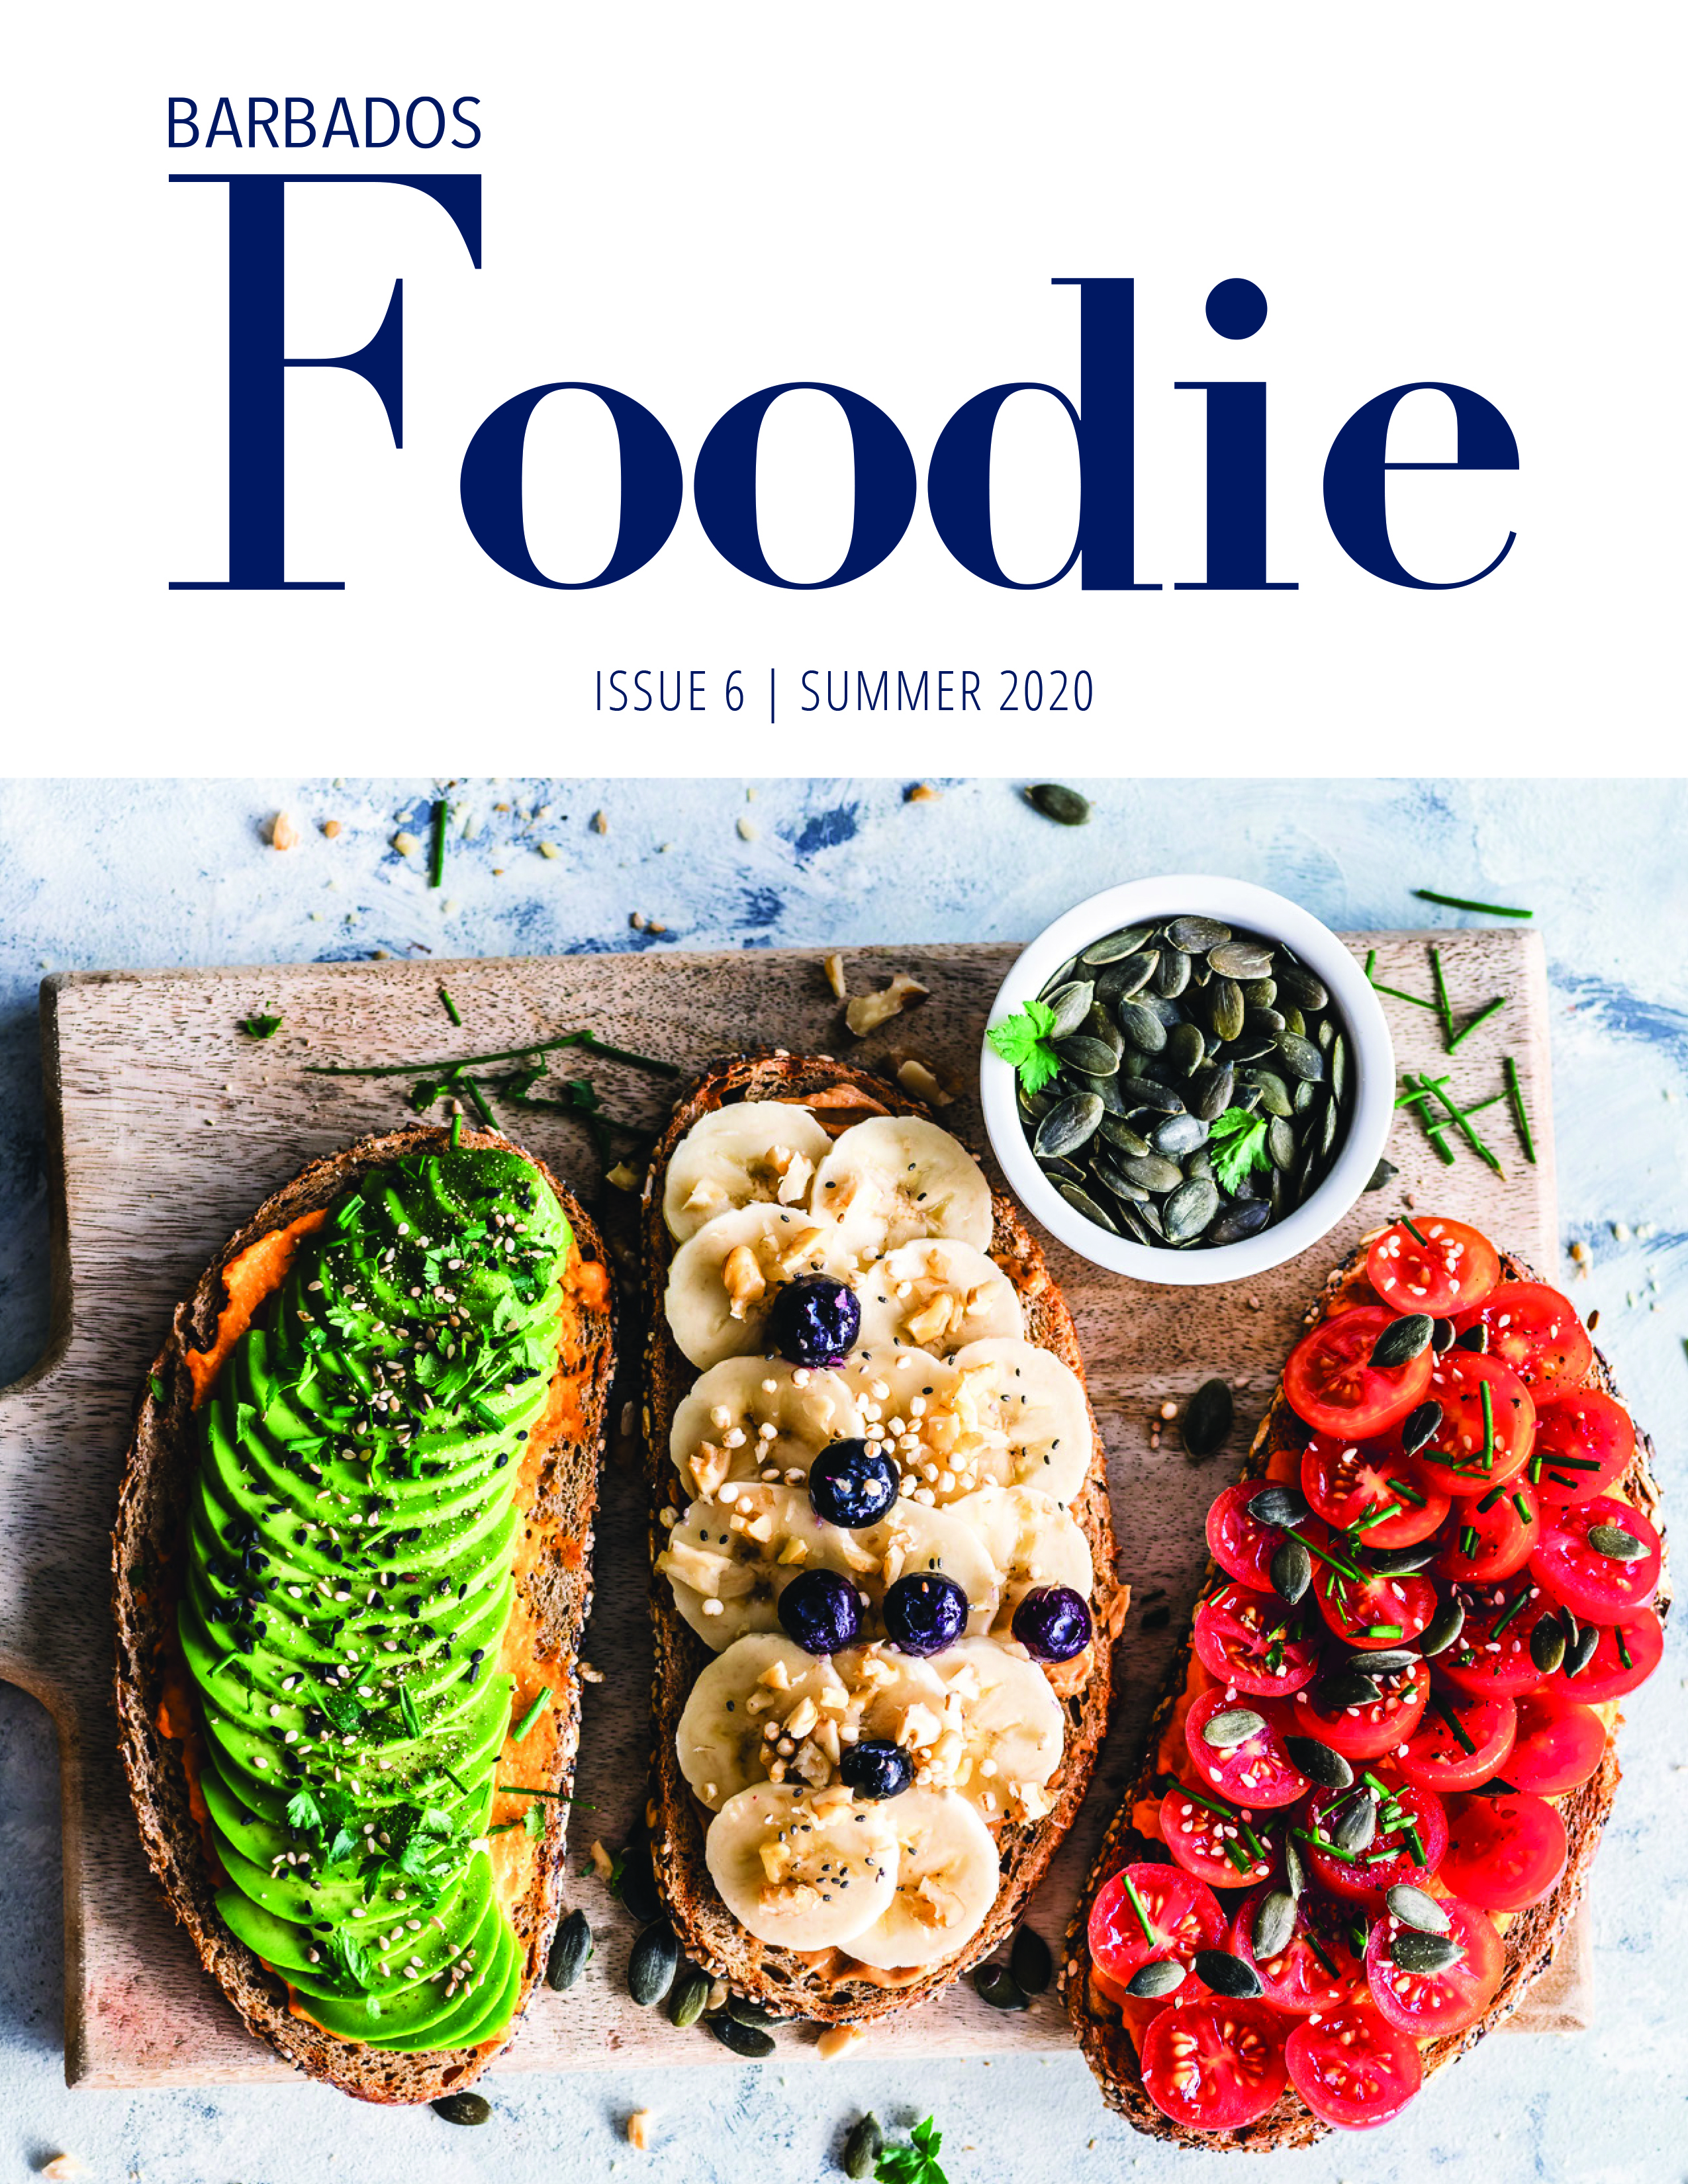 Barbados Foodie Issue 6